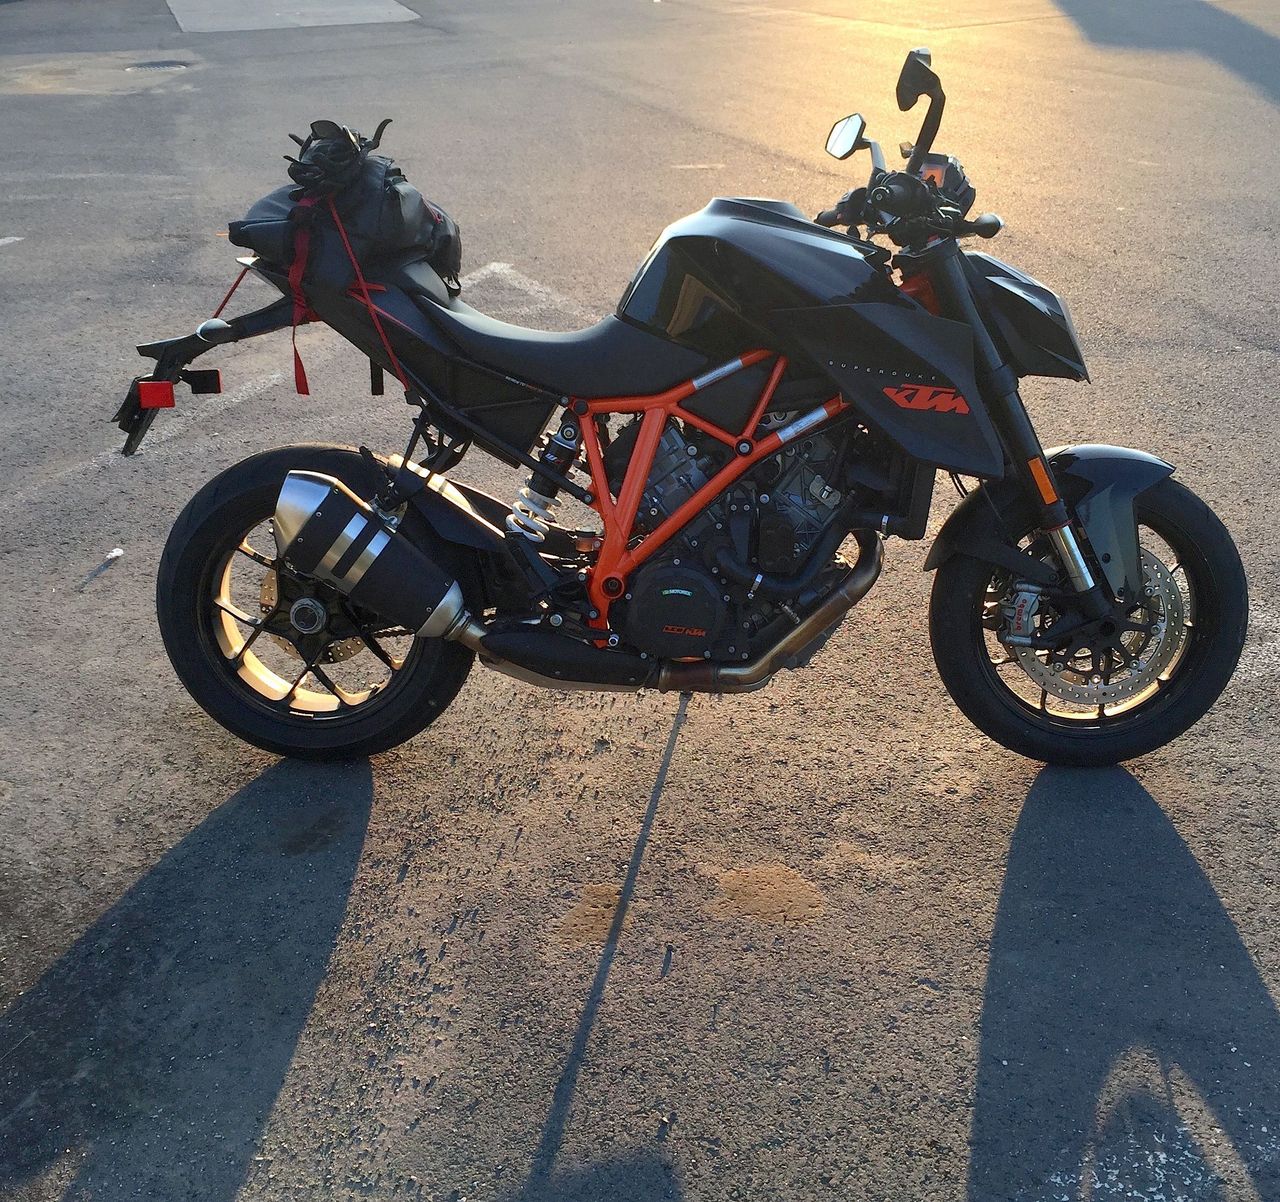 The SuperDuke can absolutely metamorphize into the Incredible Hulk (albeit with orange skin)